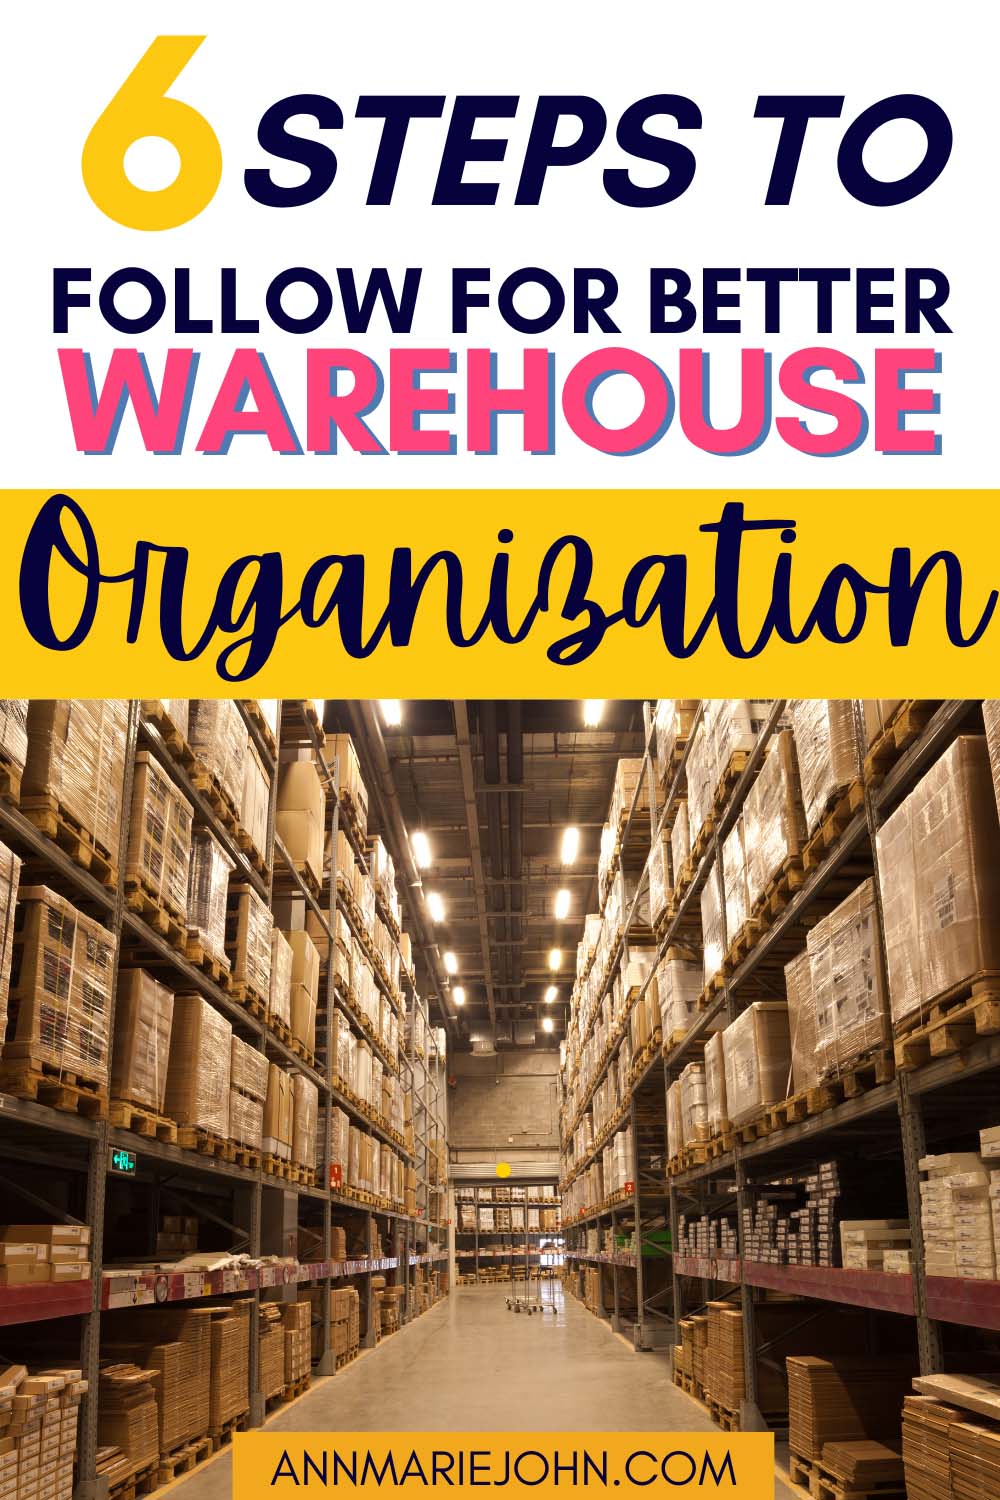 Steps to Follow for Better Warehouse Organization